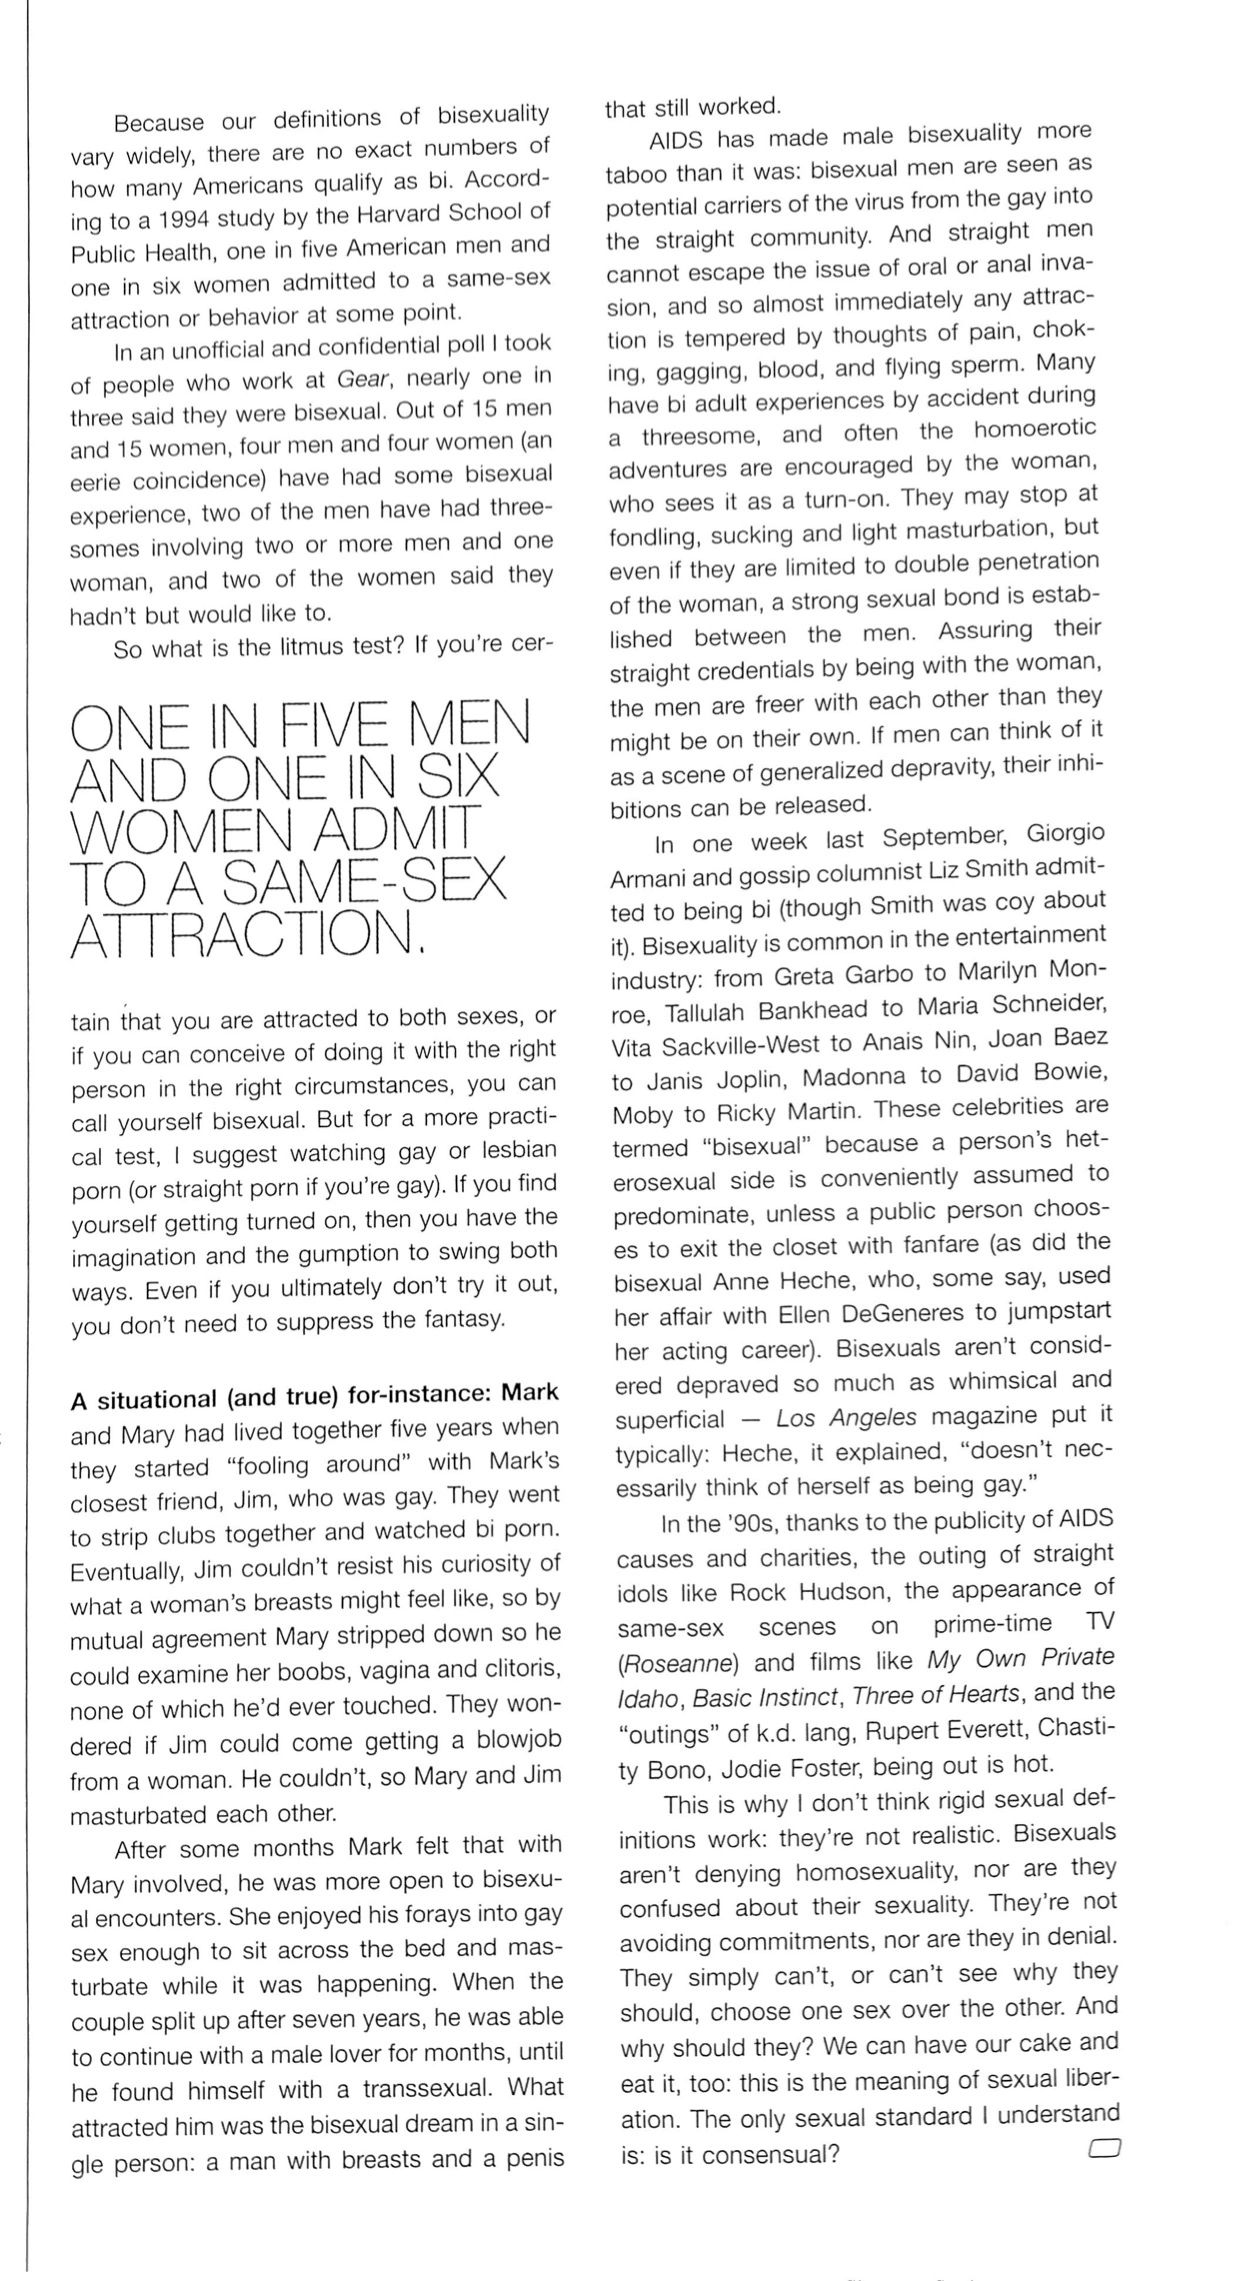 Bisexuality spin by eve eurydice article. spin magazine staff writer